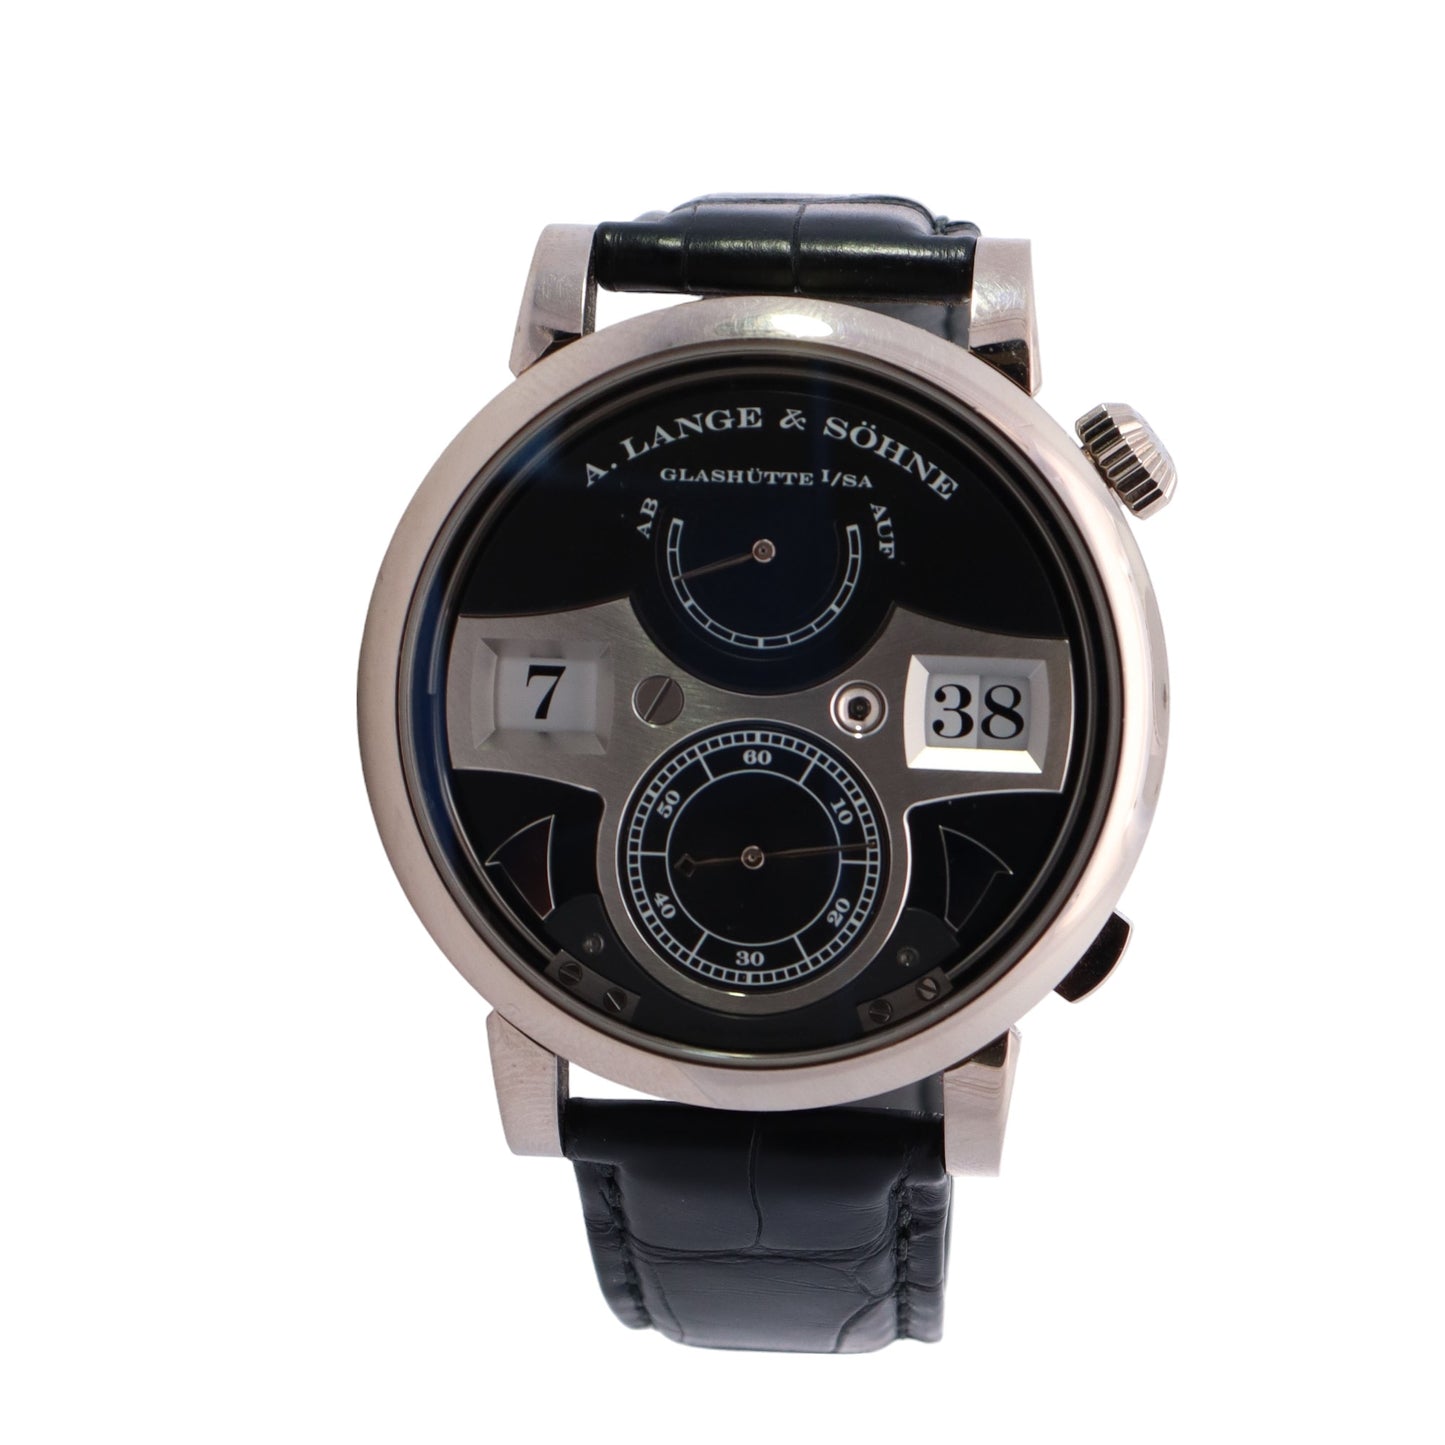 A.Lange and Sohne Zeitwerk Striking Time White Gold 44mm Black Dial Watch Reference #: 145.029